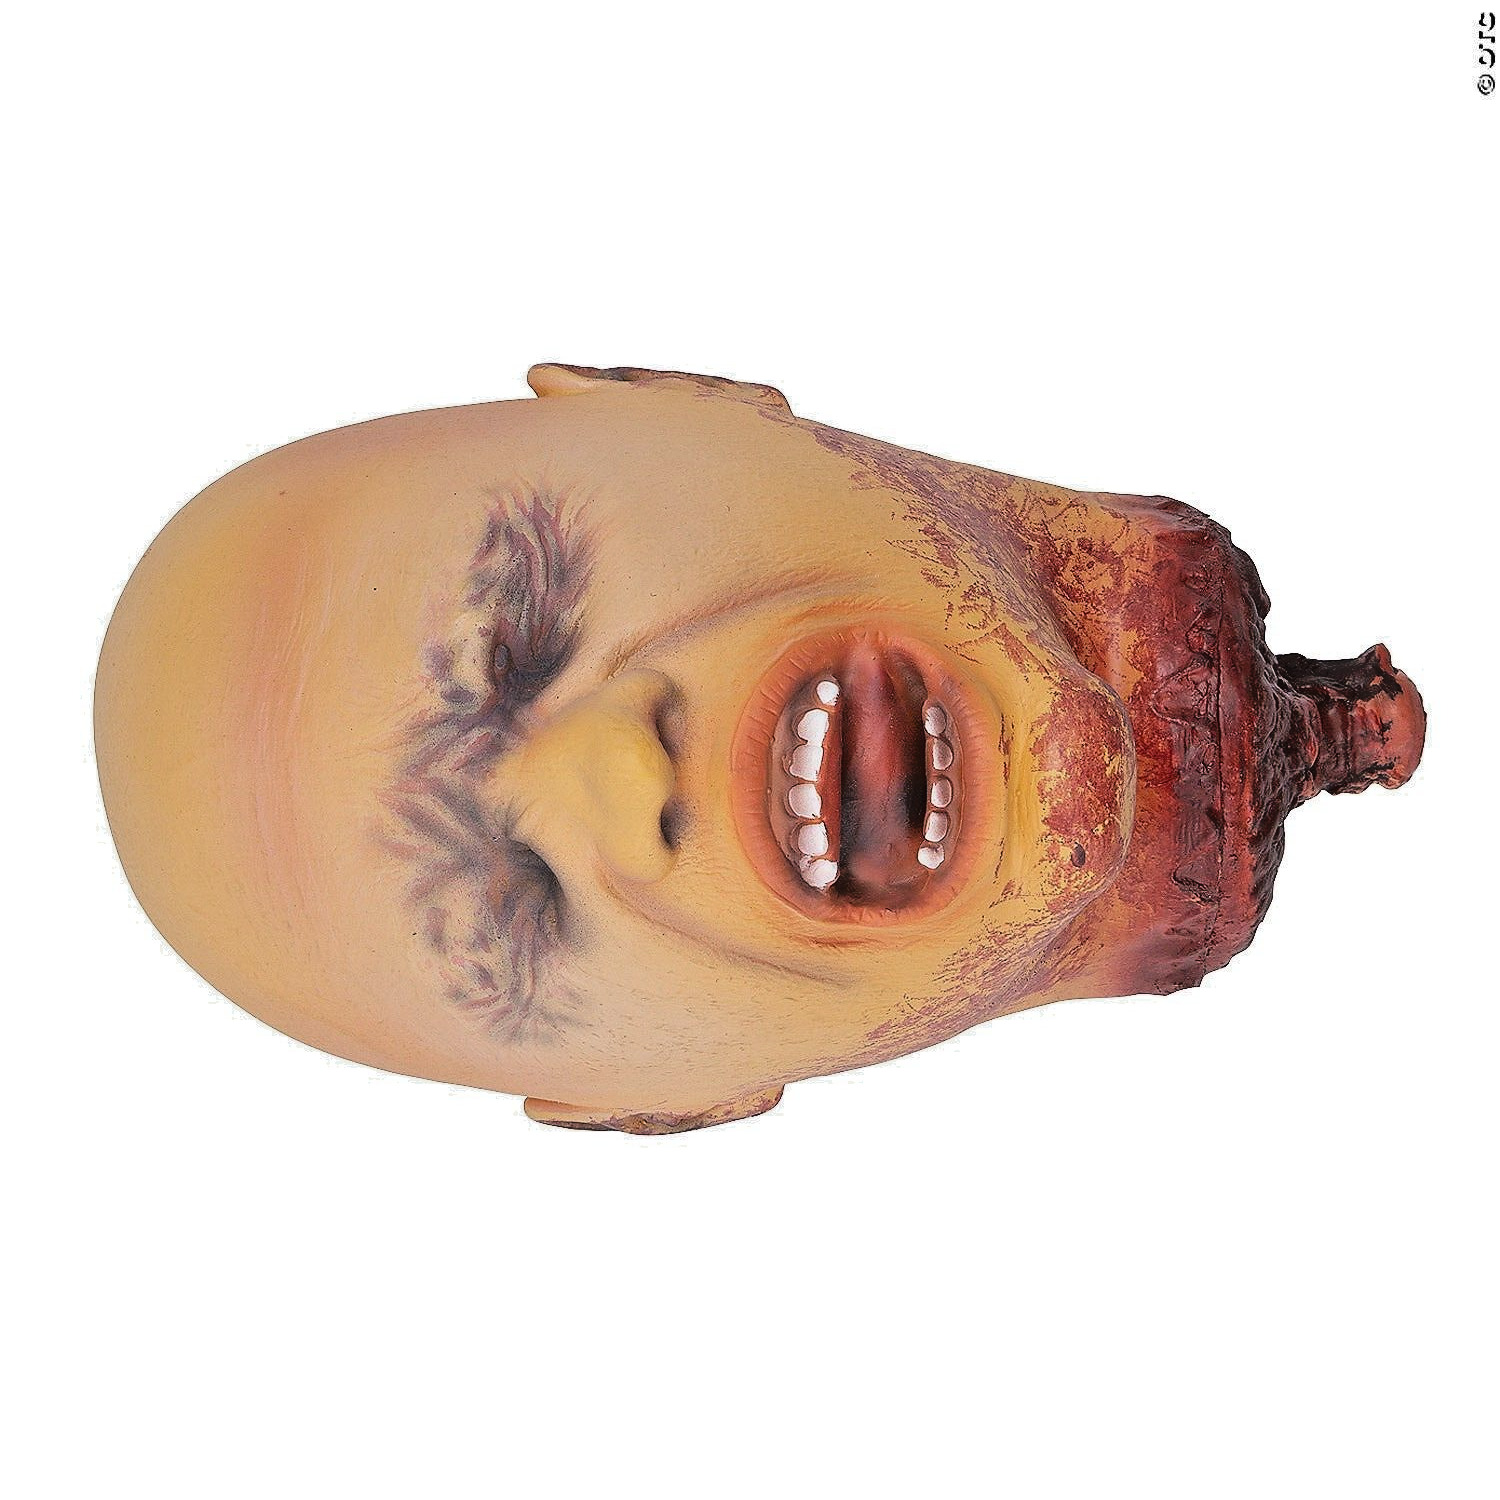 LIFE SIZE SCREAMING SEVERED HEAD Halloween Haunted House Horror Prop Decoration,